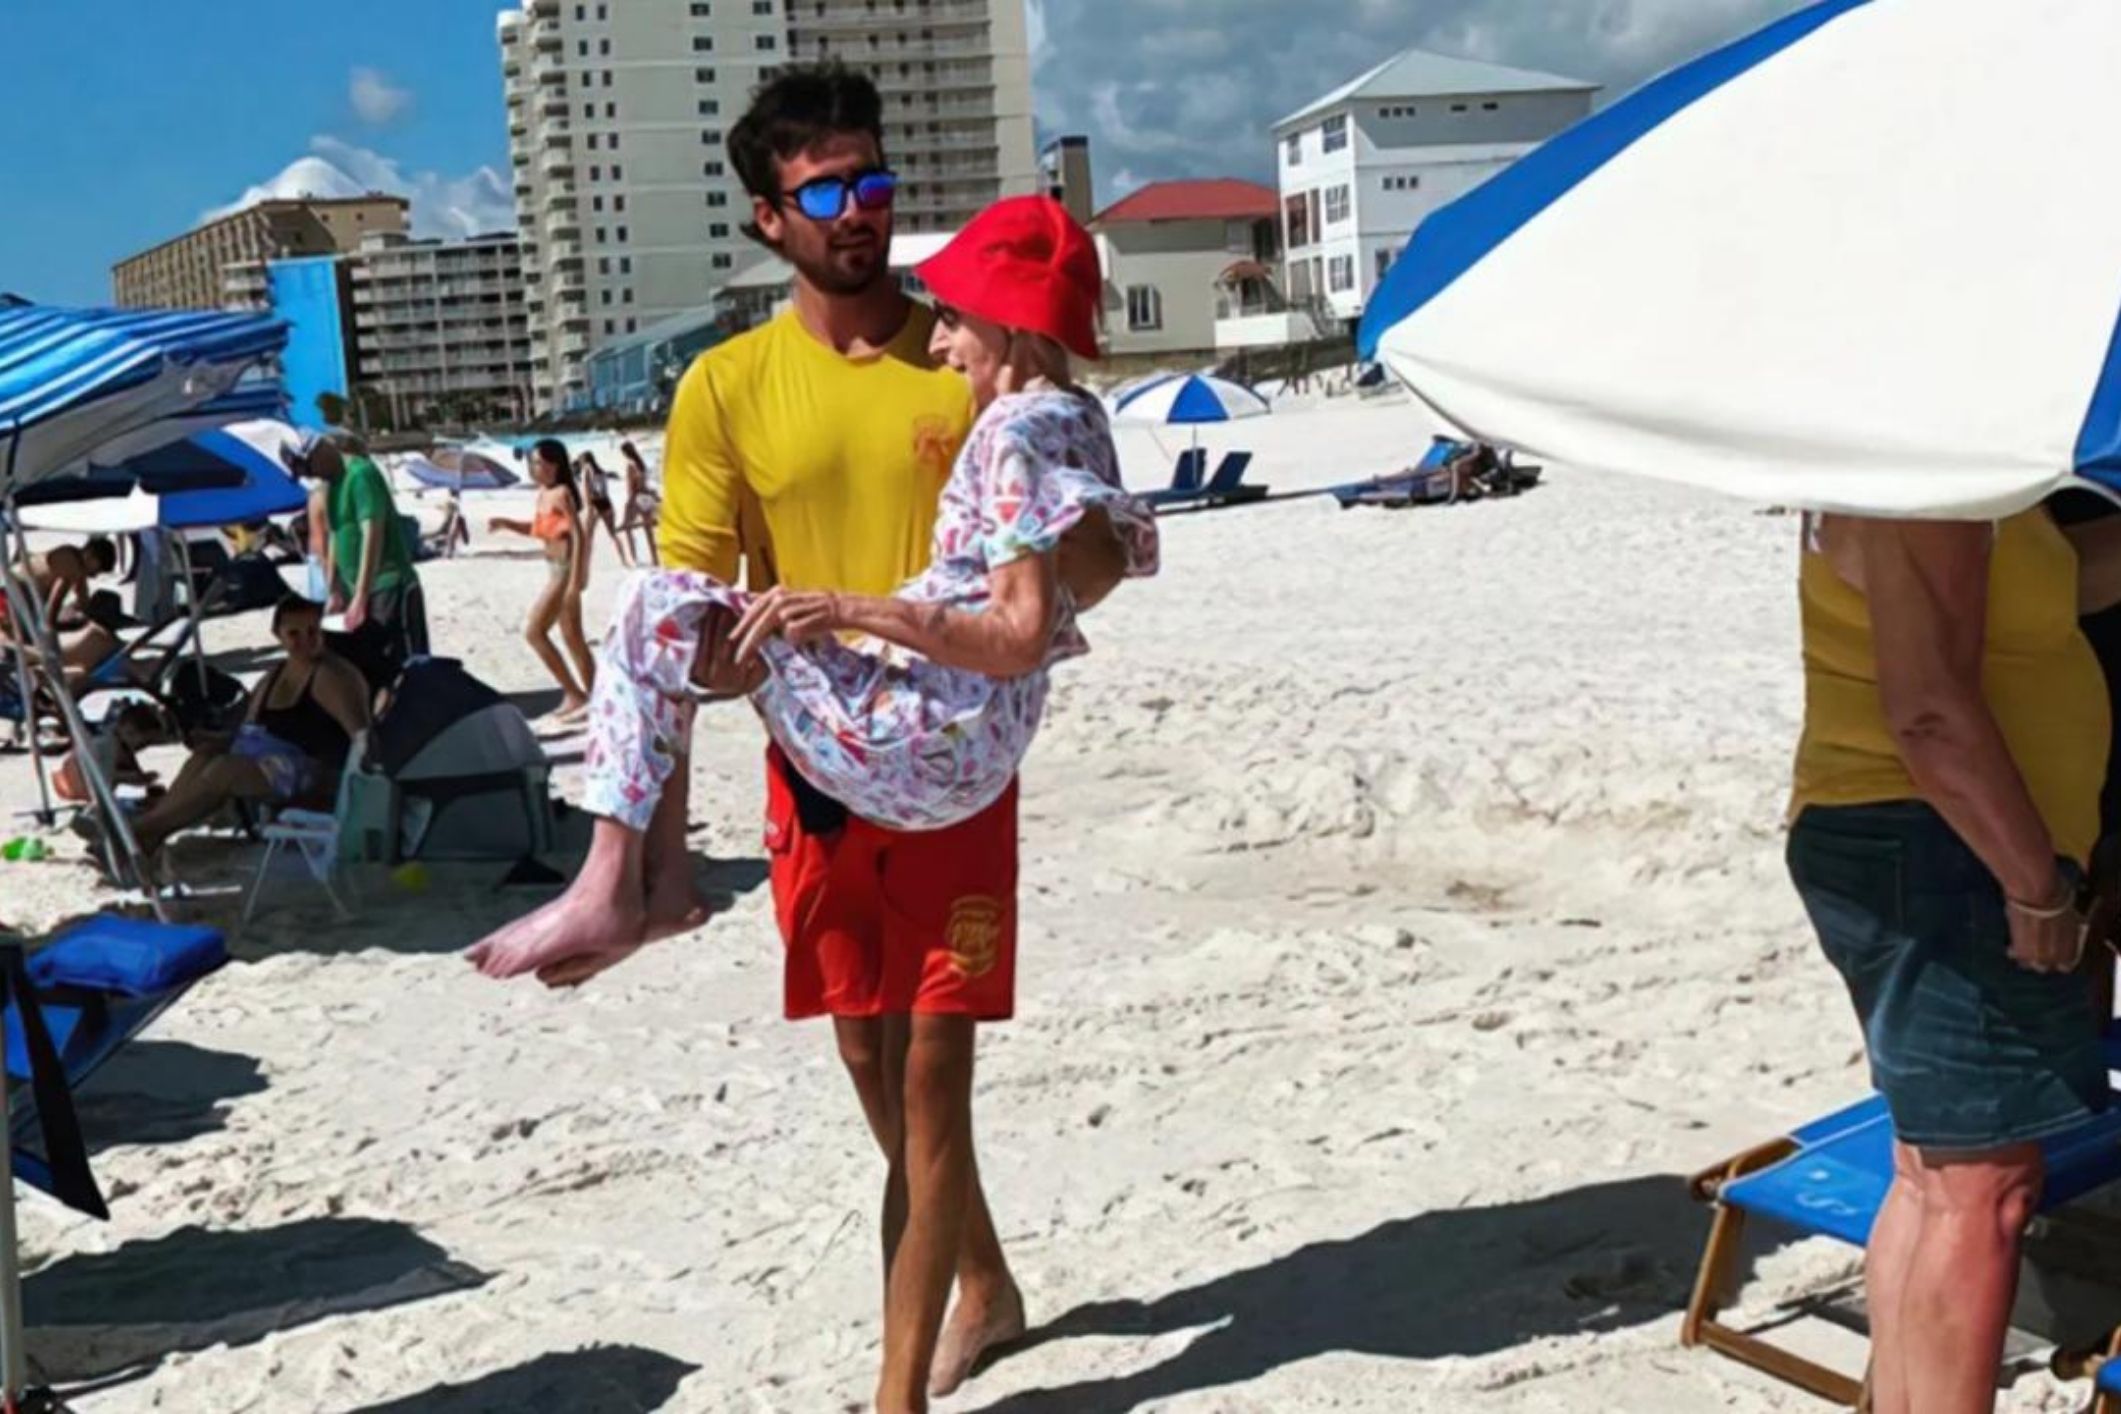 Lifeguards have a heartwarming solution for elderly woman who can’t walk on sand